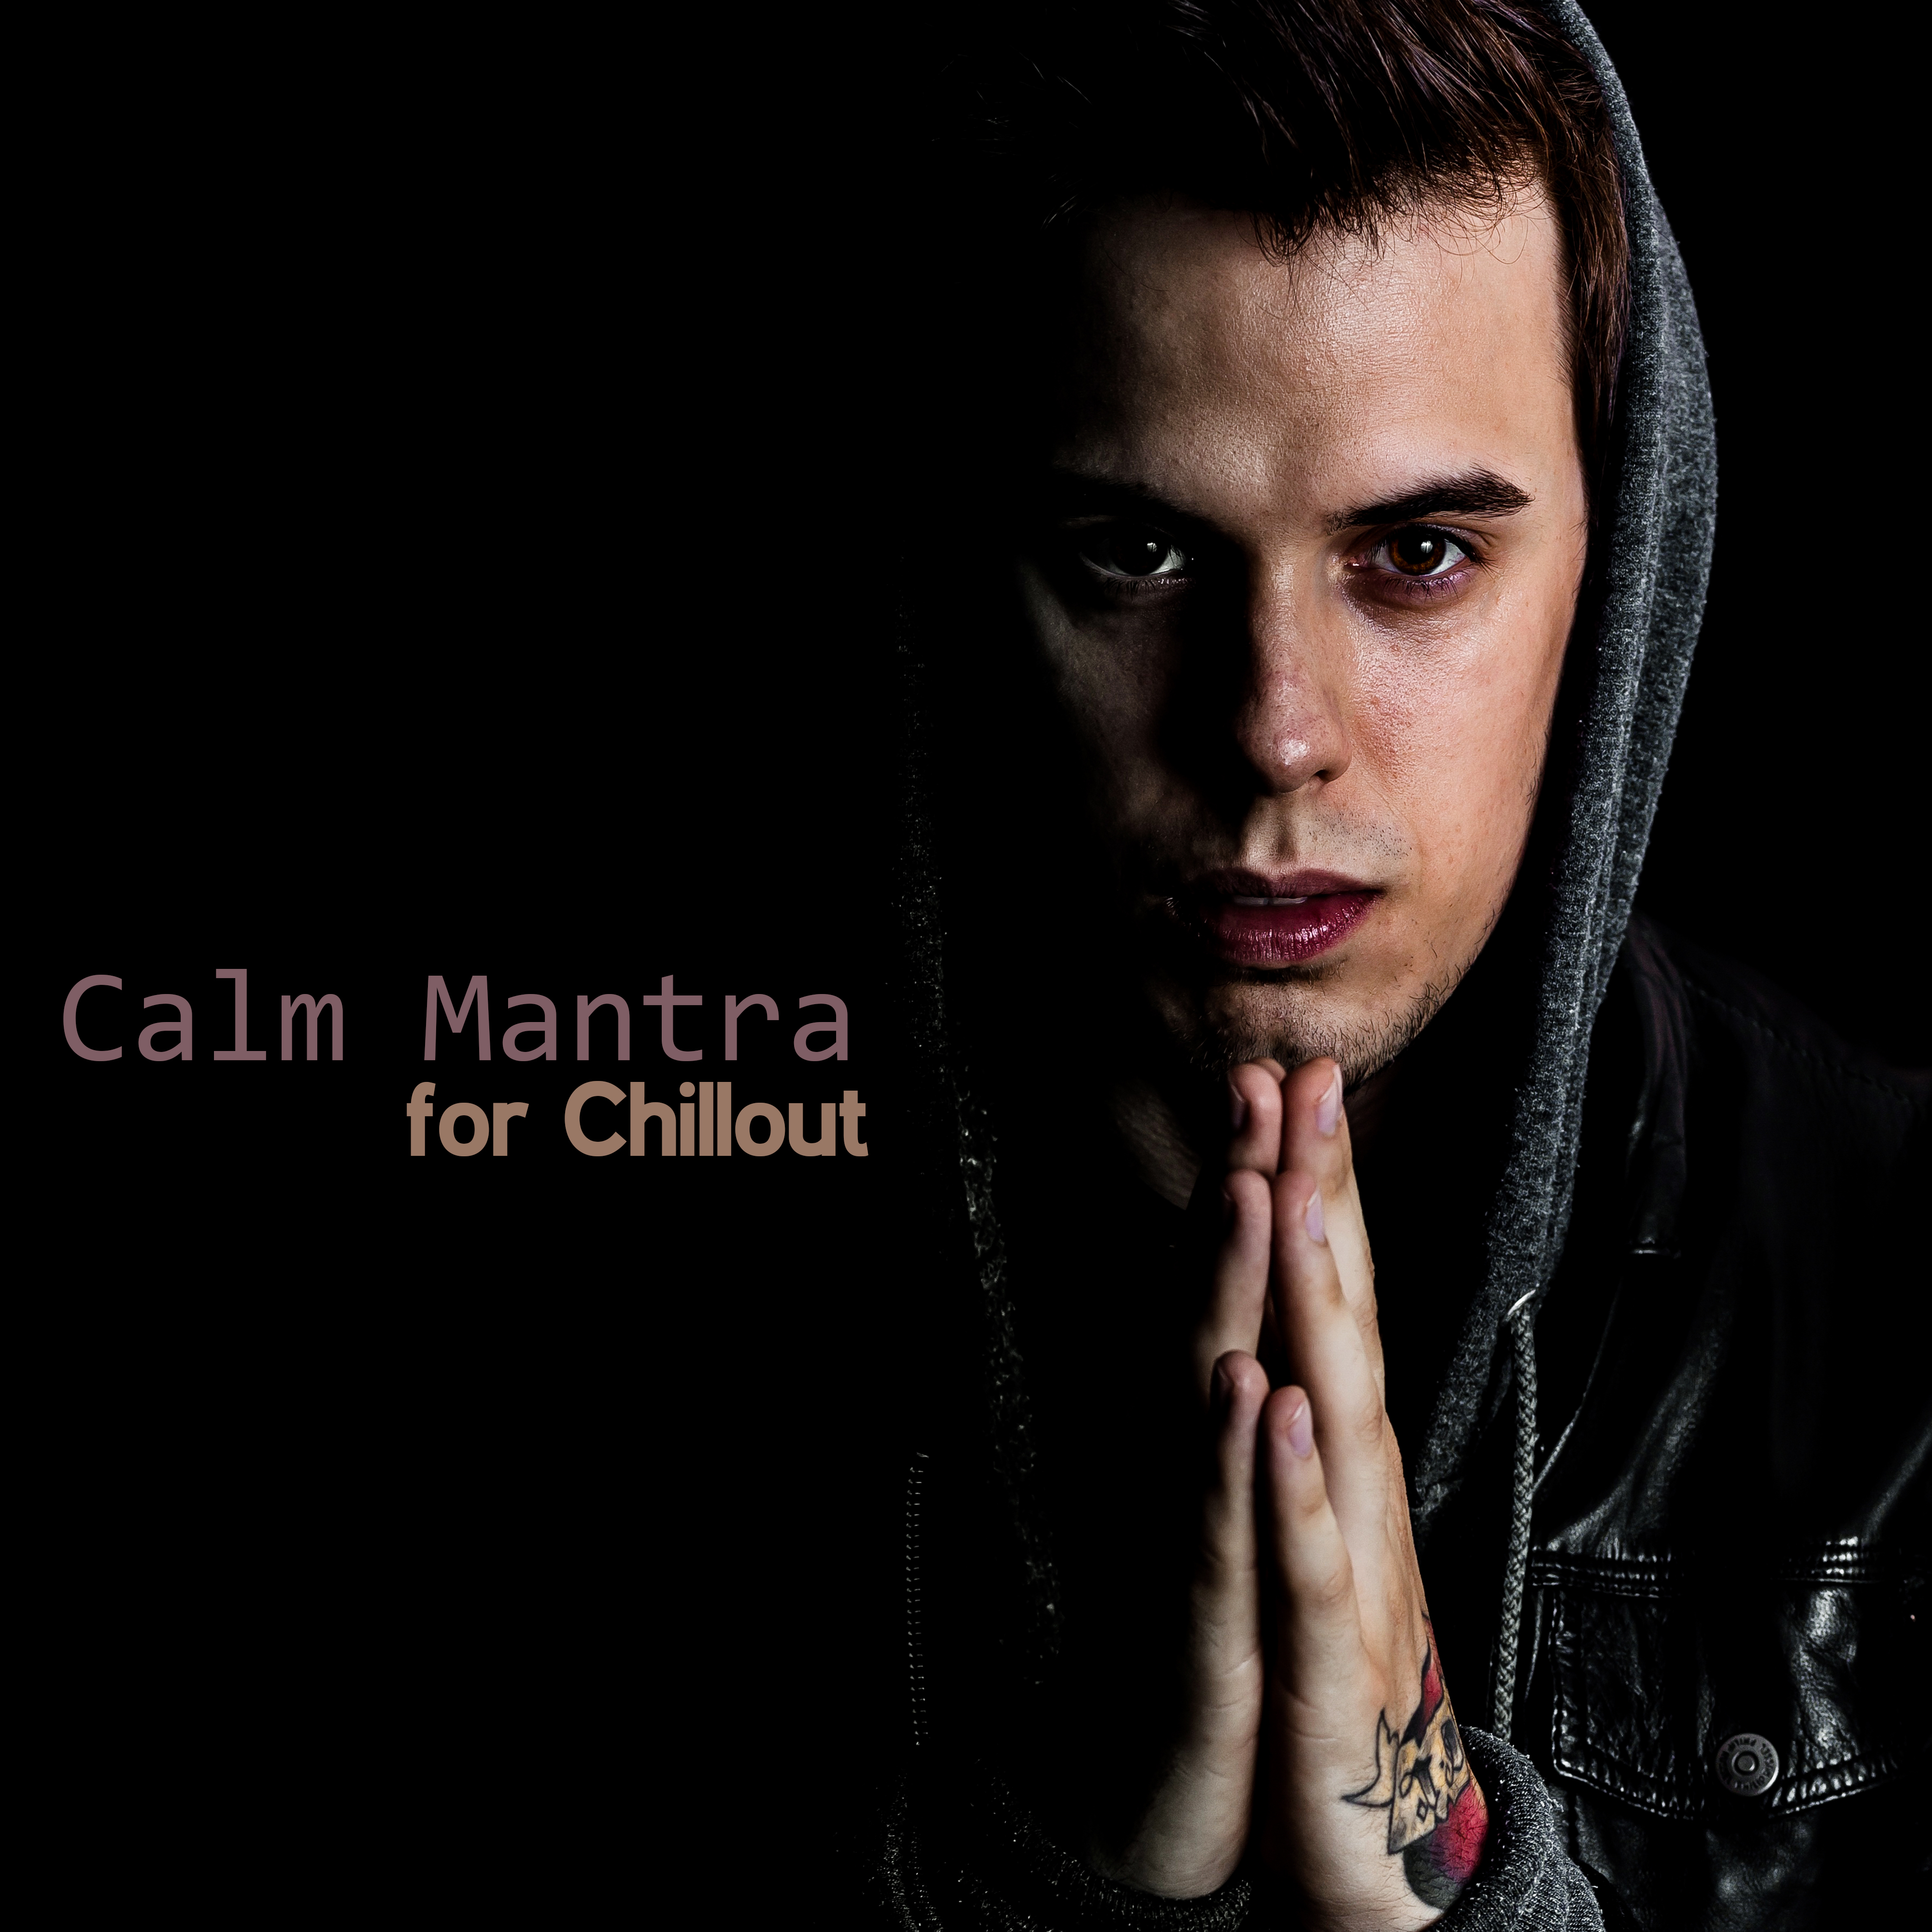 Calm Mantra for Chillout